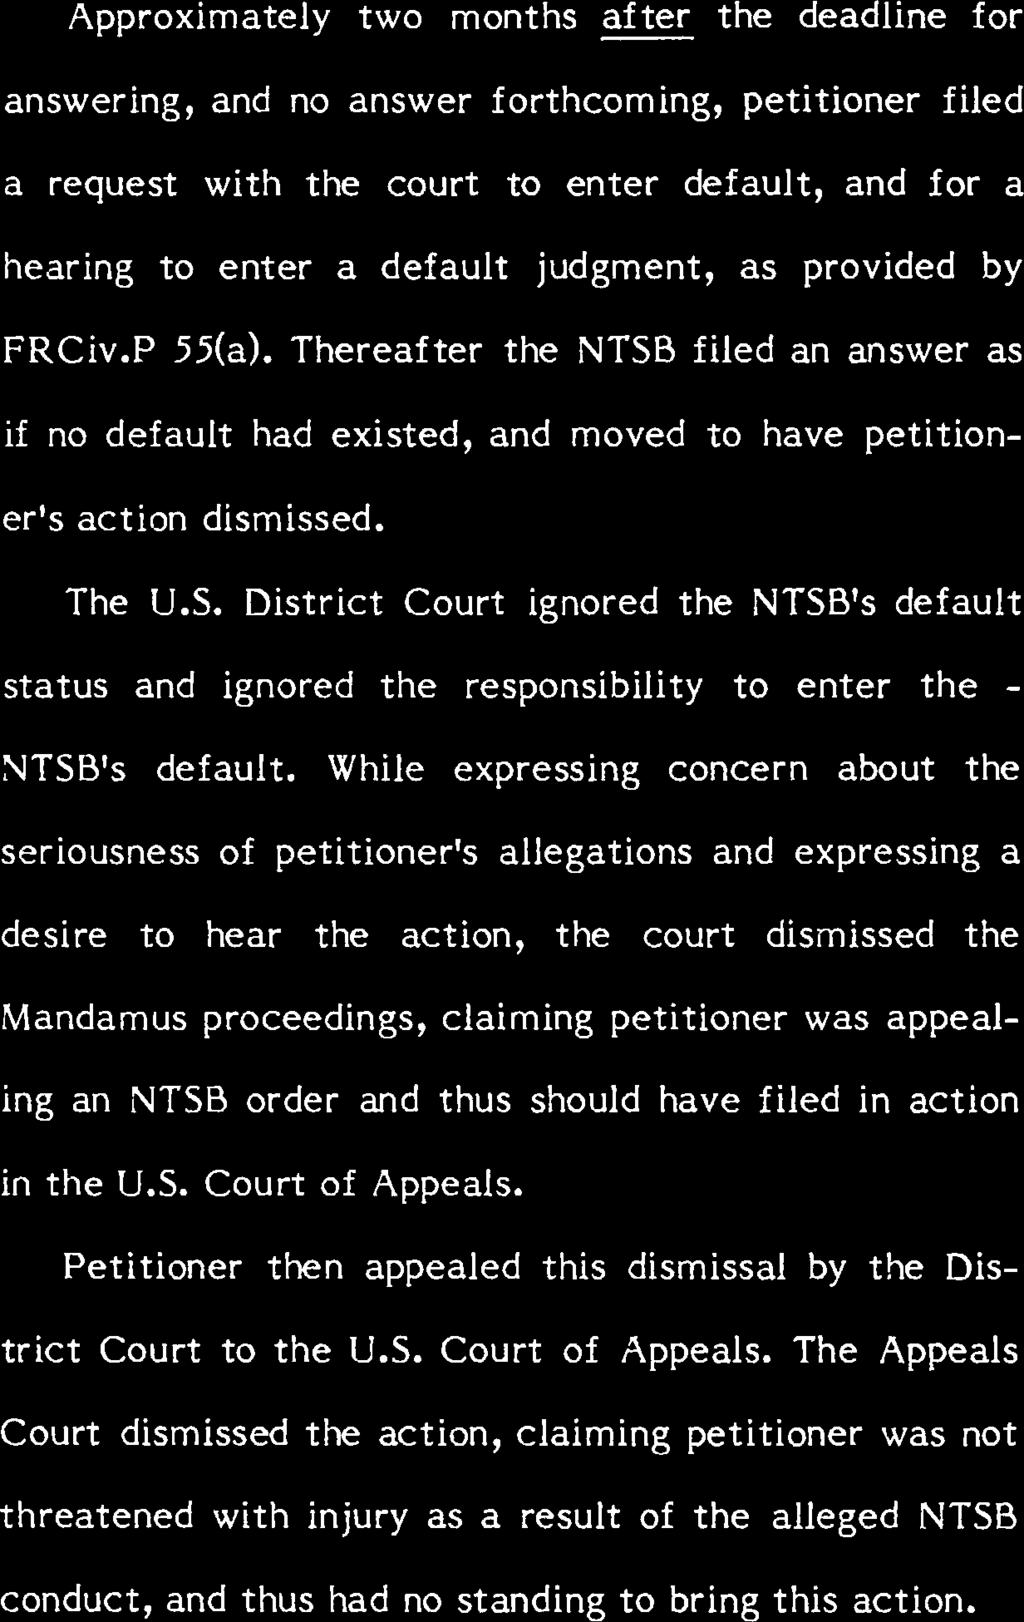 provided by FRCiv.P 55(a). Thereafter the NTSB filed an answer as if no default had existed, and moved to have petitioner's action dismissed. The U.S. District Court ignored the NTSB's default status and ignored the responsibility to enter the - NTSB's default.